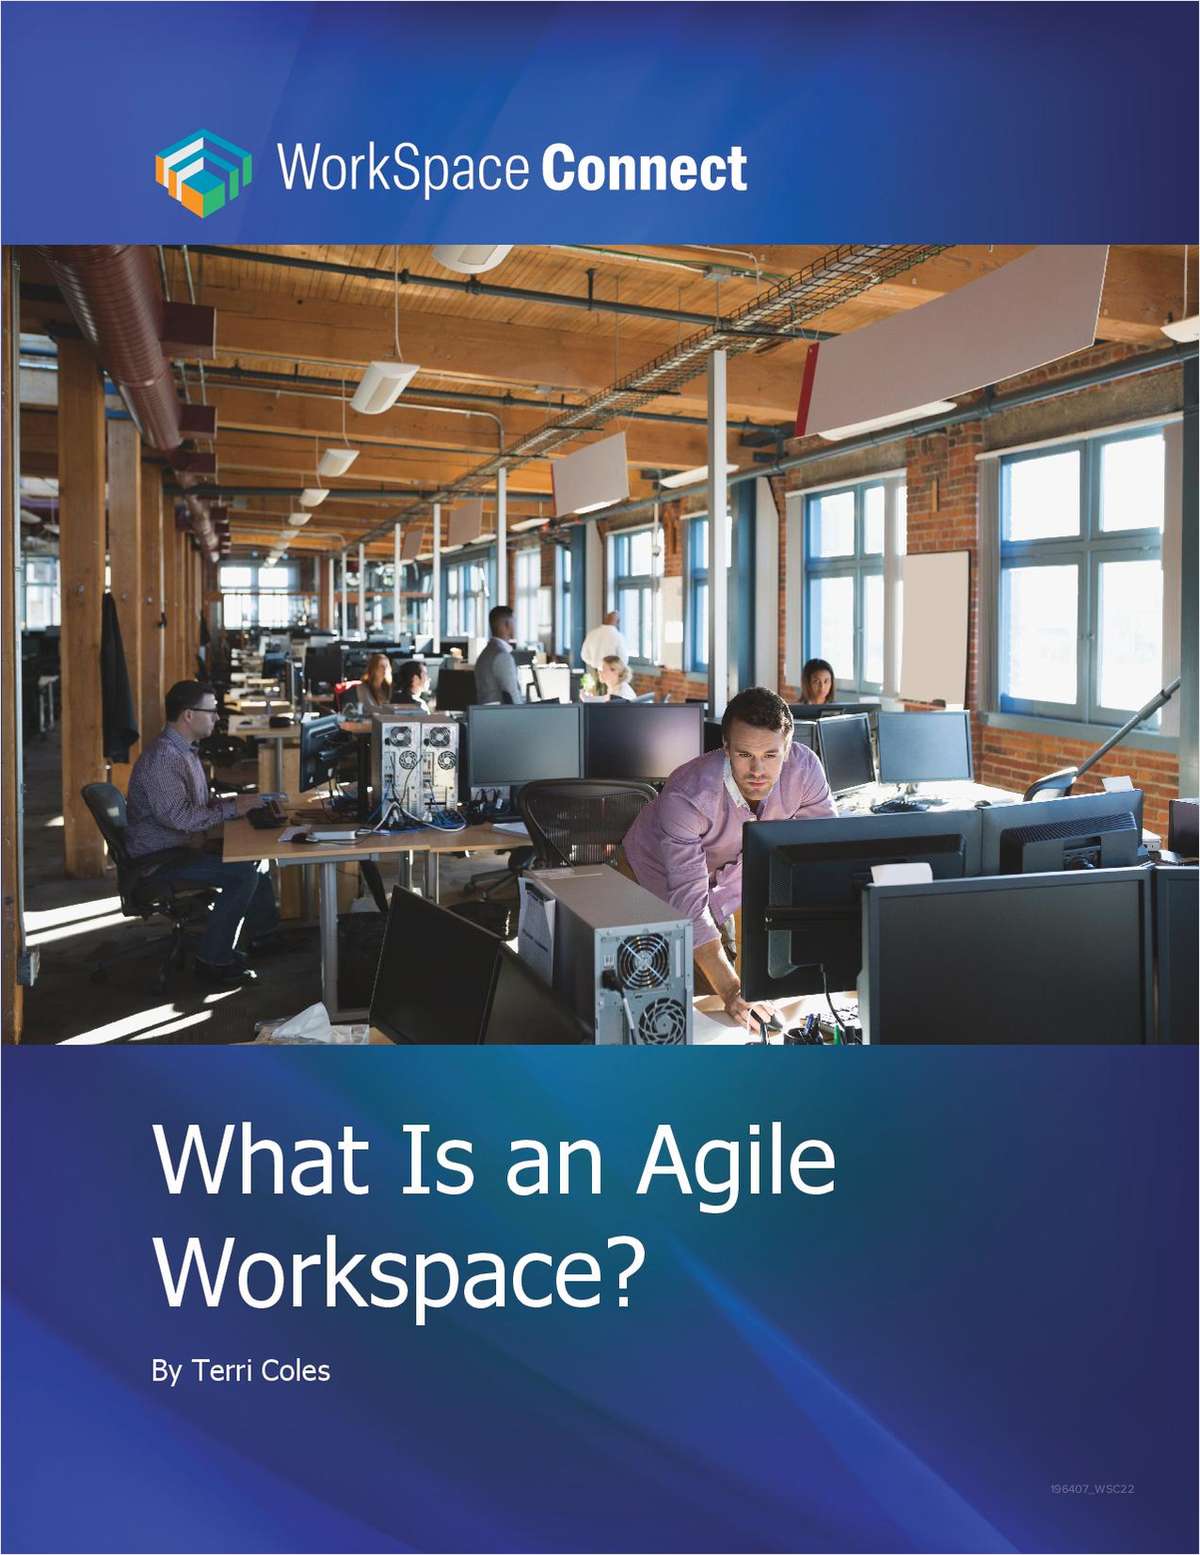 What Is an Agile Workspace?